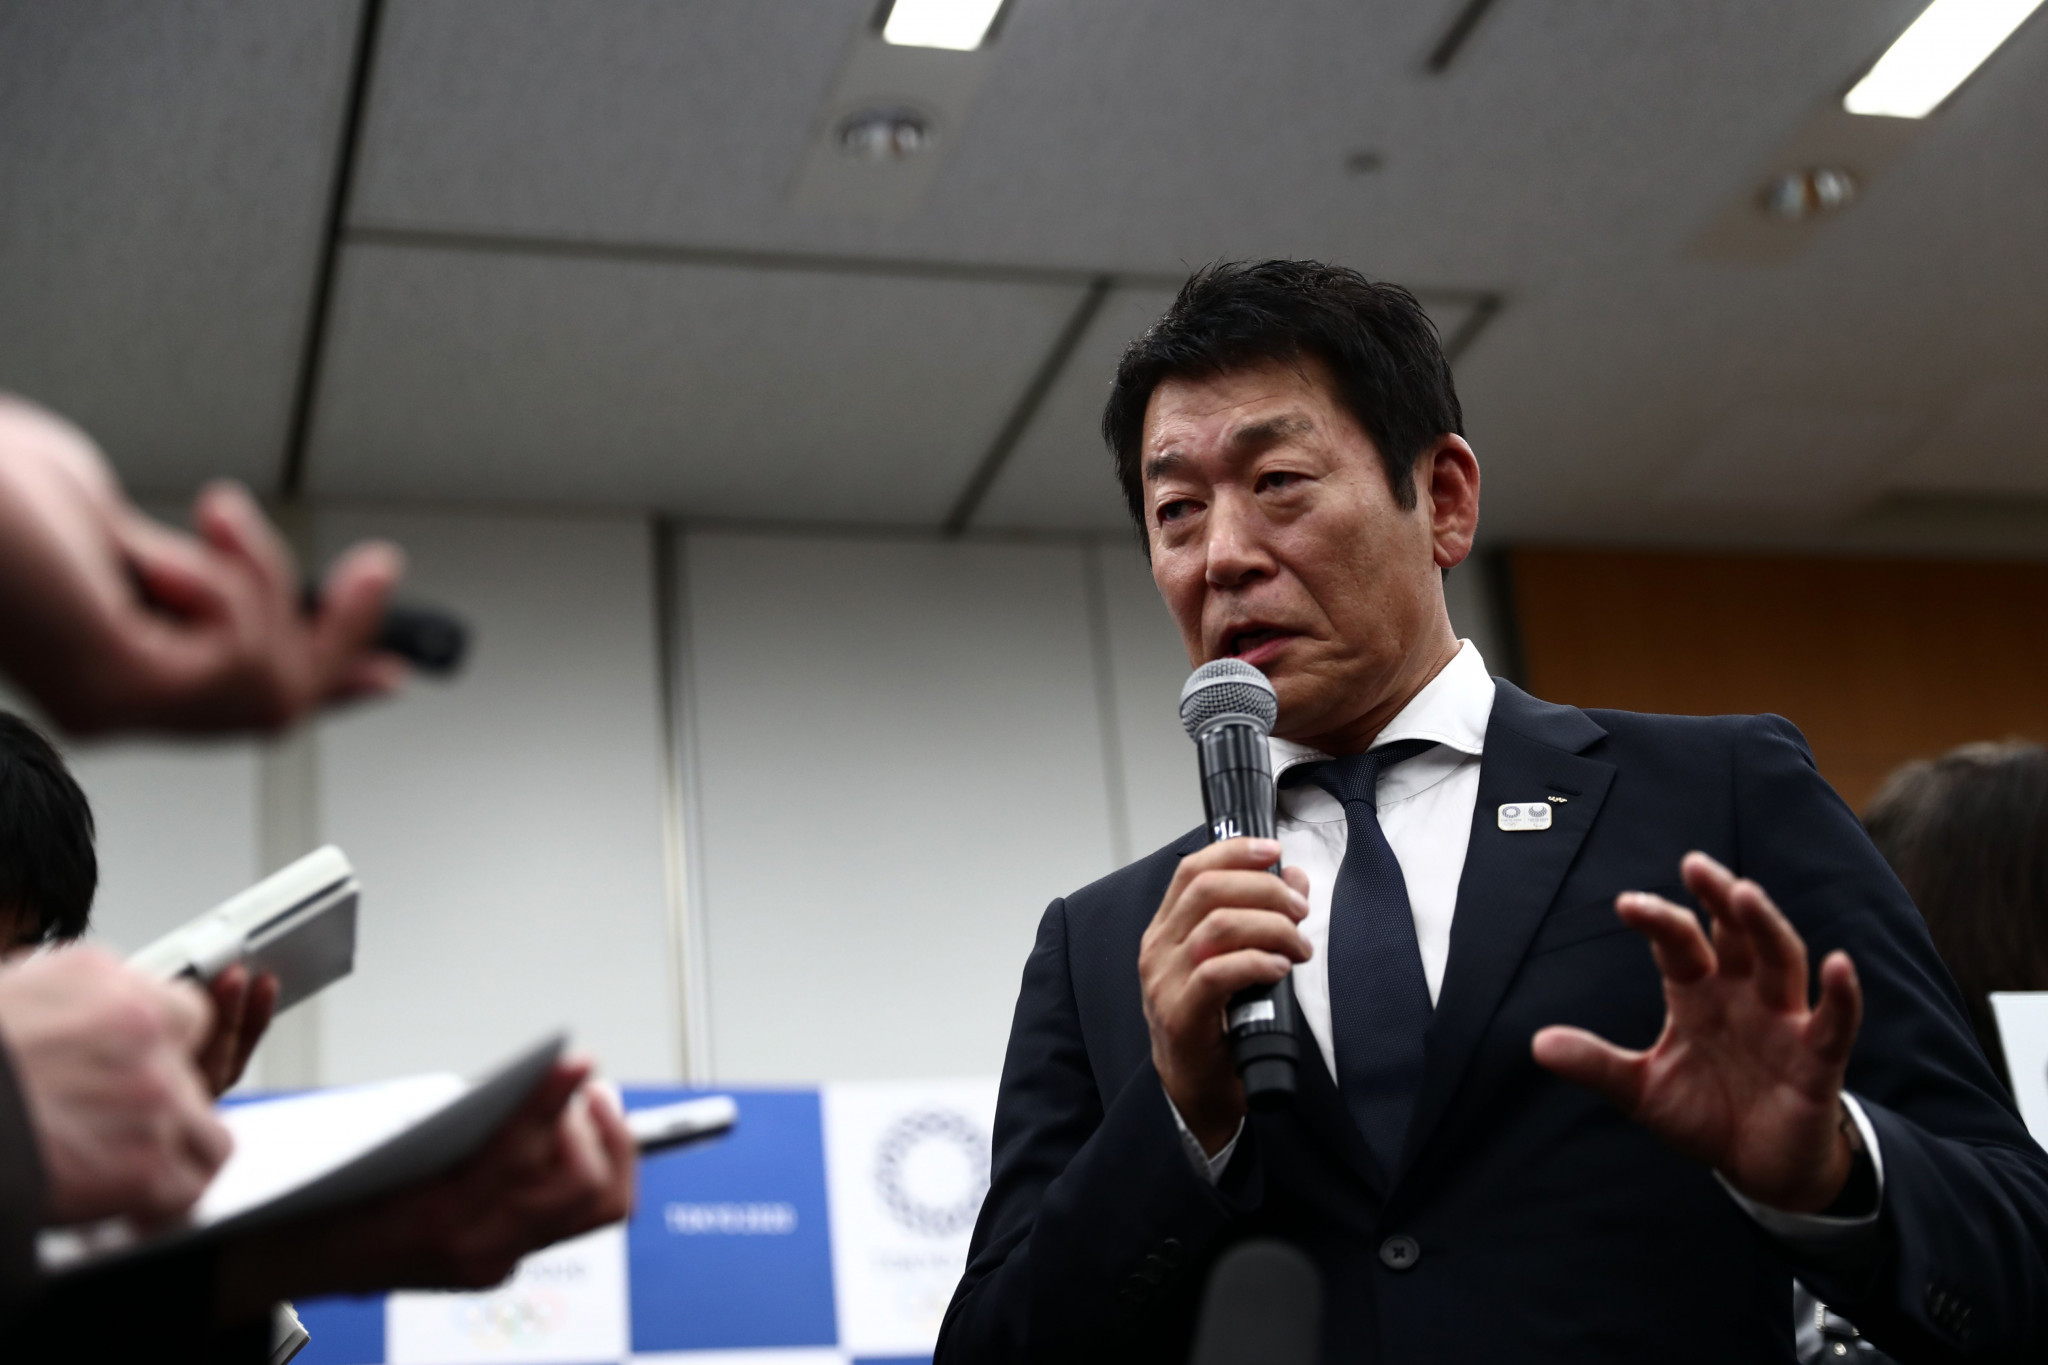 Morinari Watanabe, the current FIG President, is expected to contest his re-election unopposed  ©Getty Images